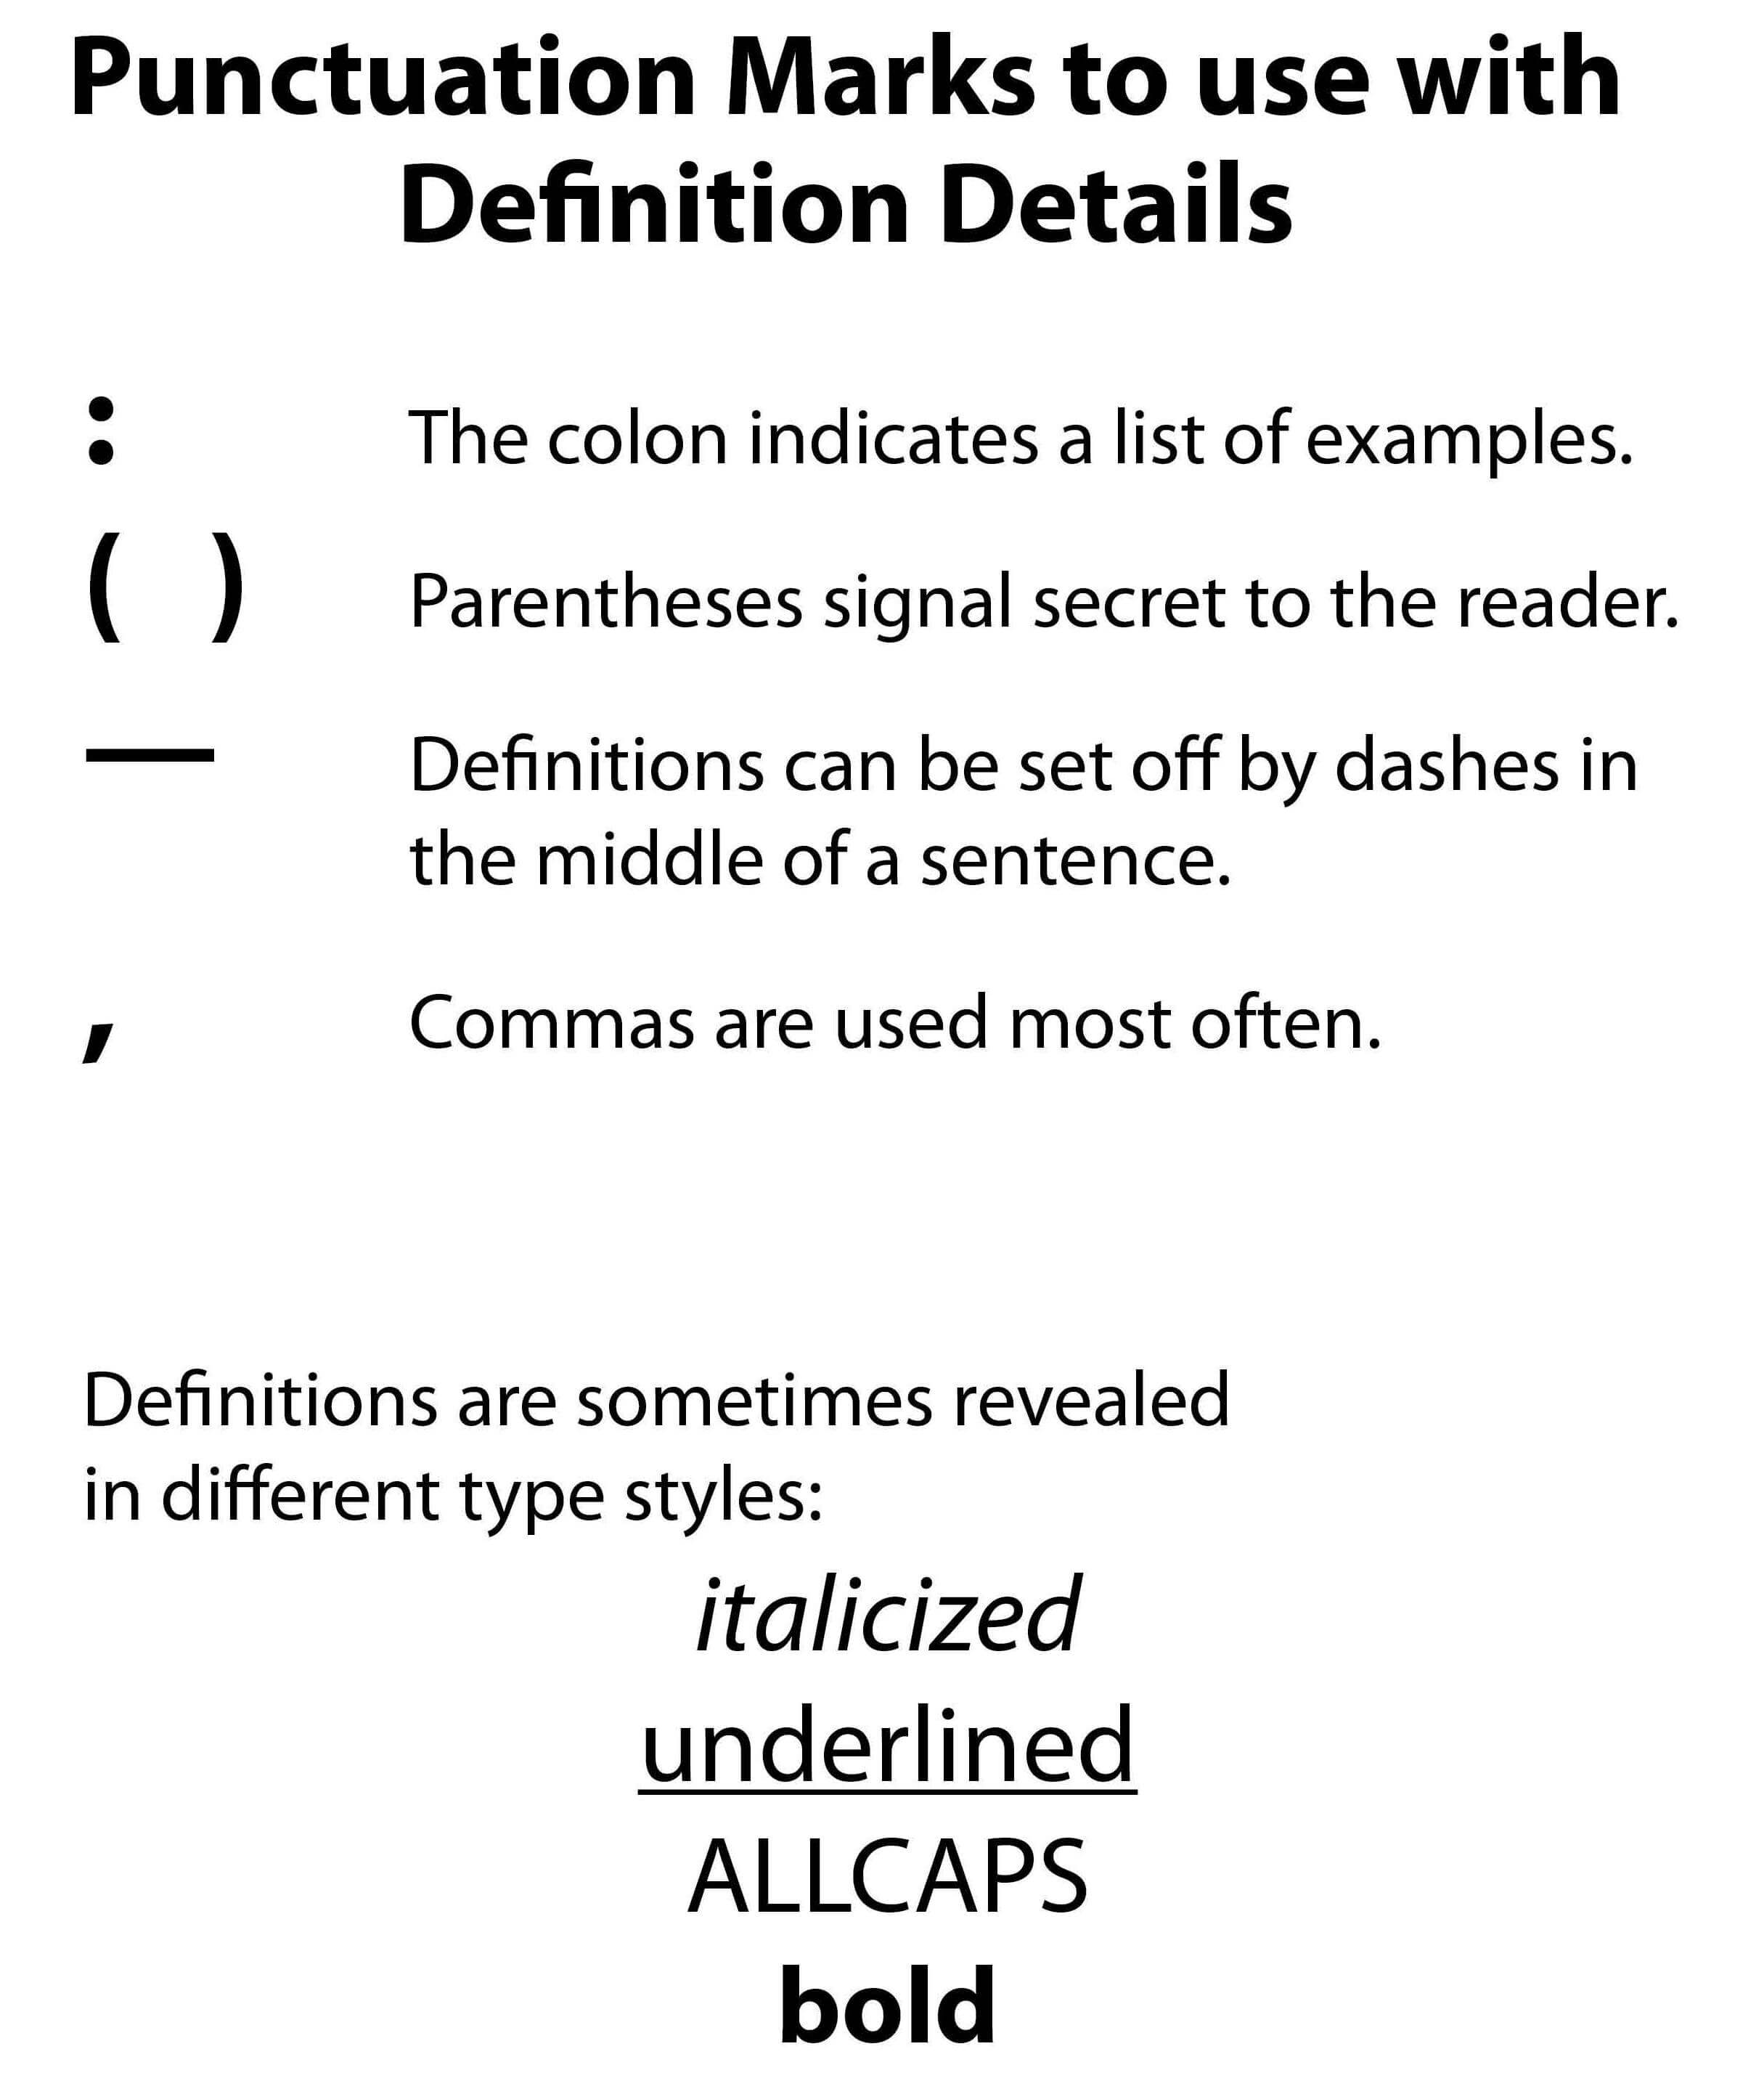 Punctuation Marks to use with Definition Details